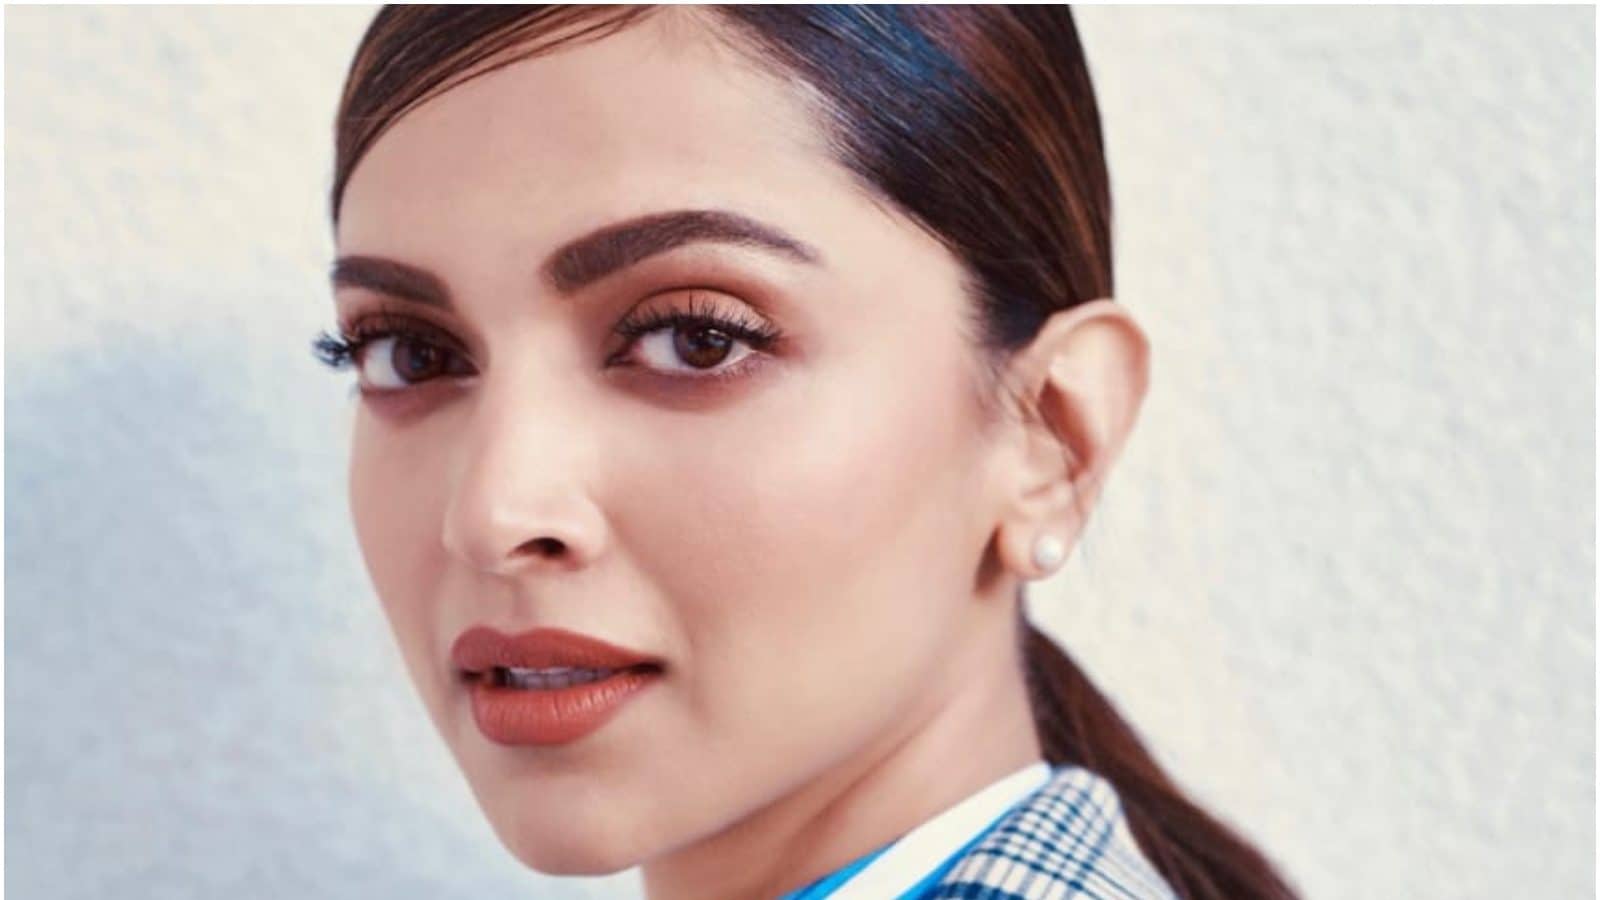 Everything we know about Deepika Padukone's new self-care brand